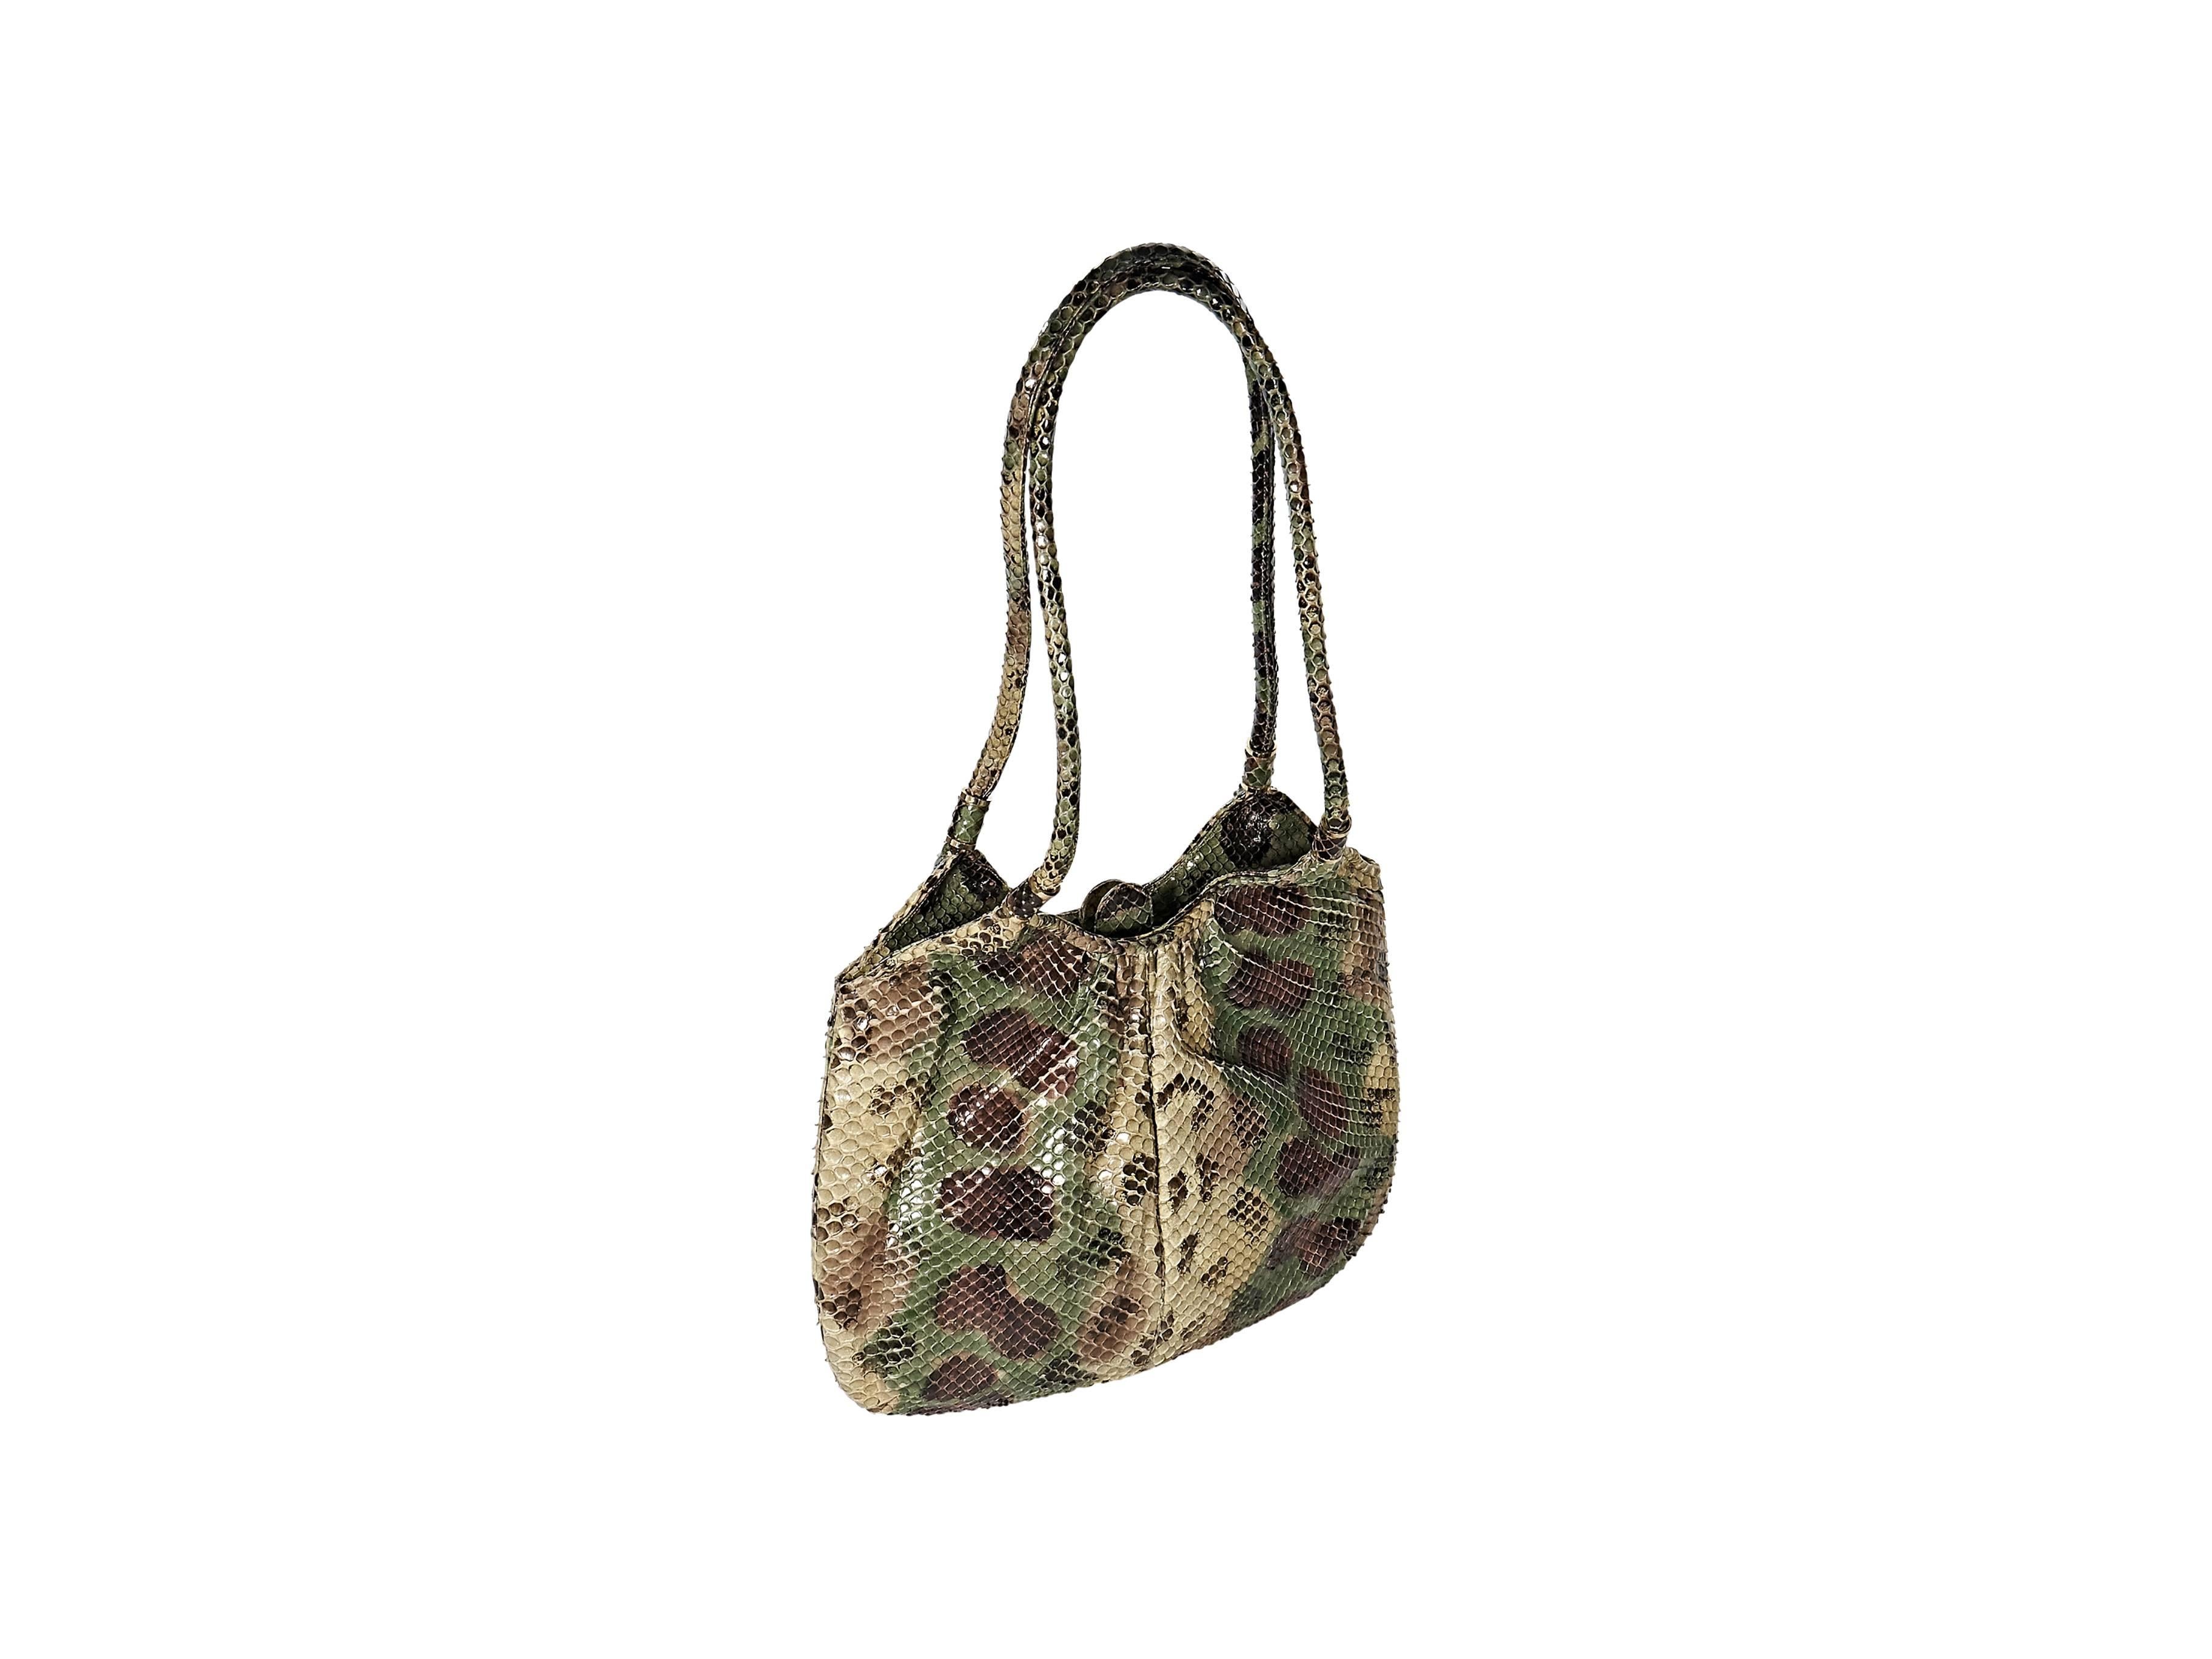 Product details: Green, tan and brown exotic python shoulder bag by Judith Leiber. Dual shoulder straps. Lined interior with inner slide pockets. Dust bag included. 10